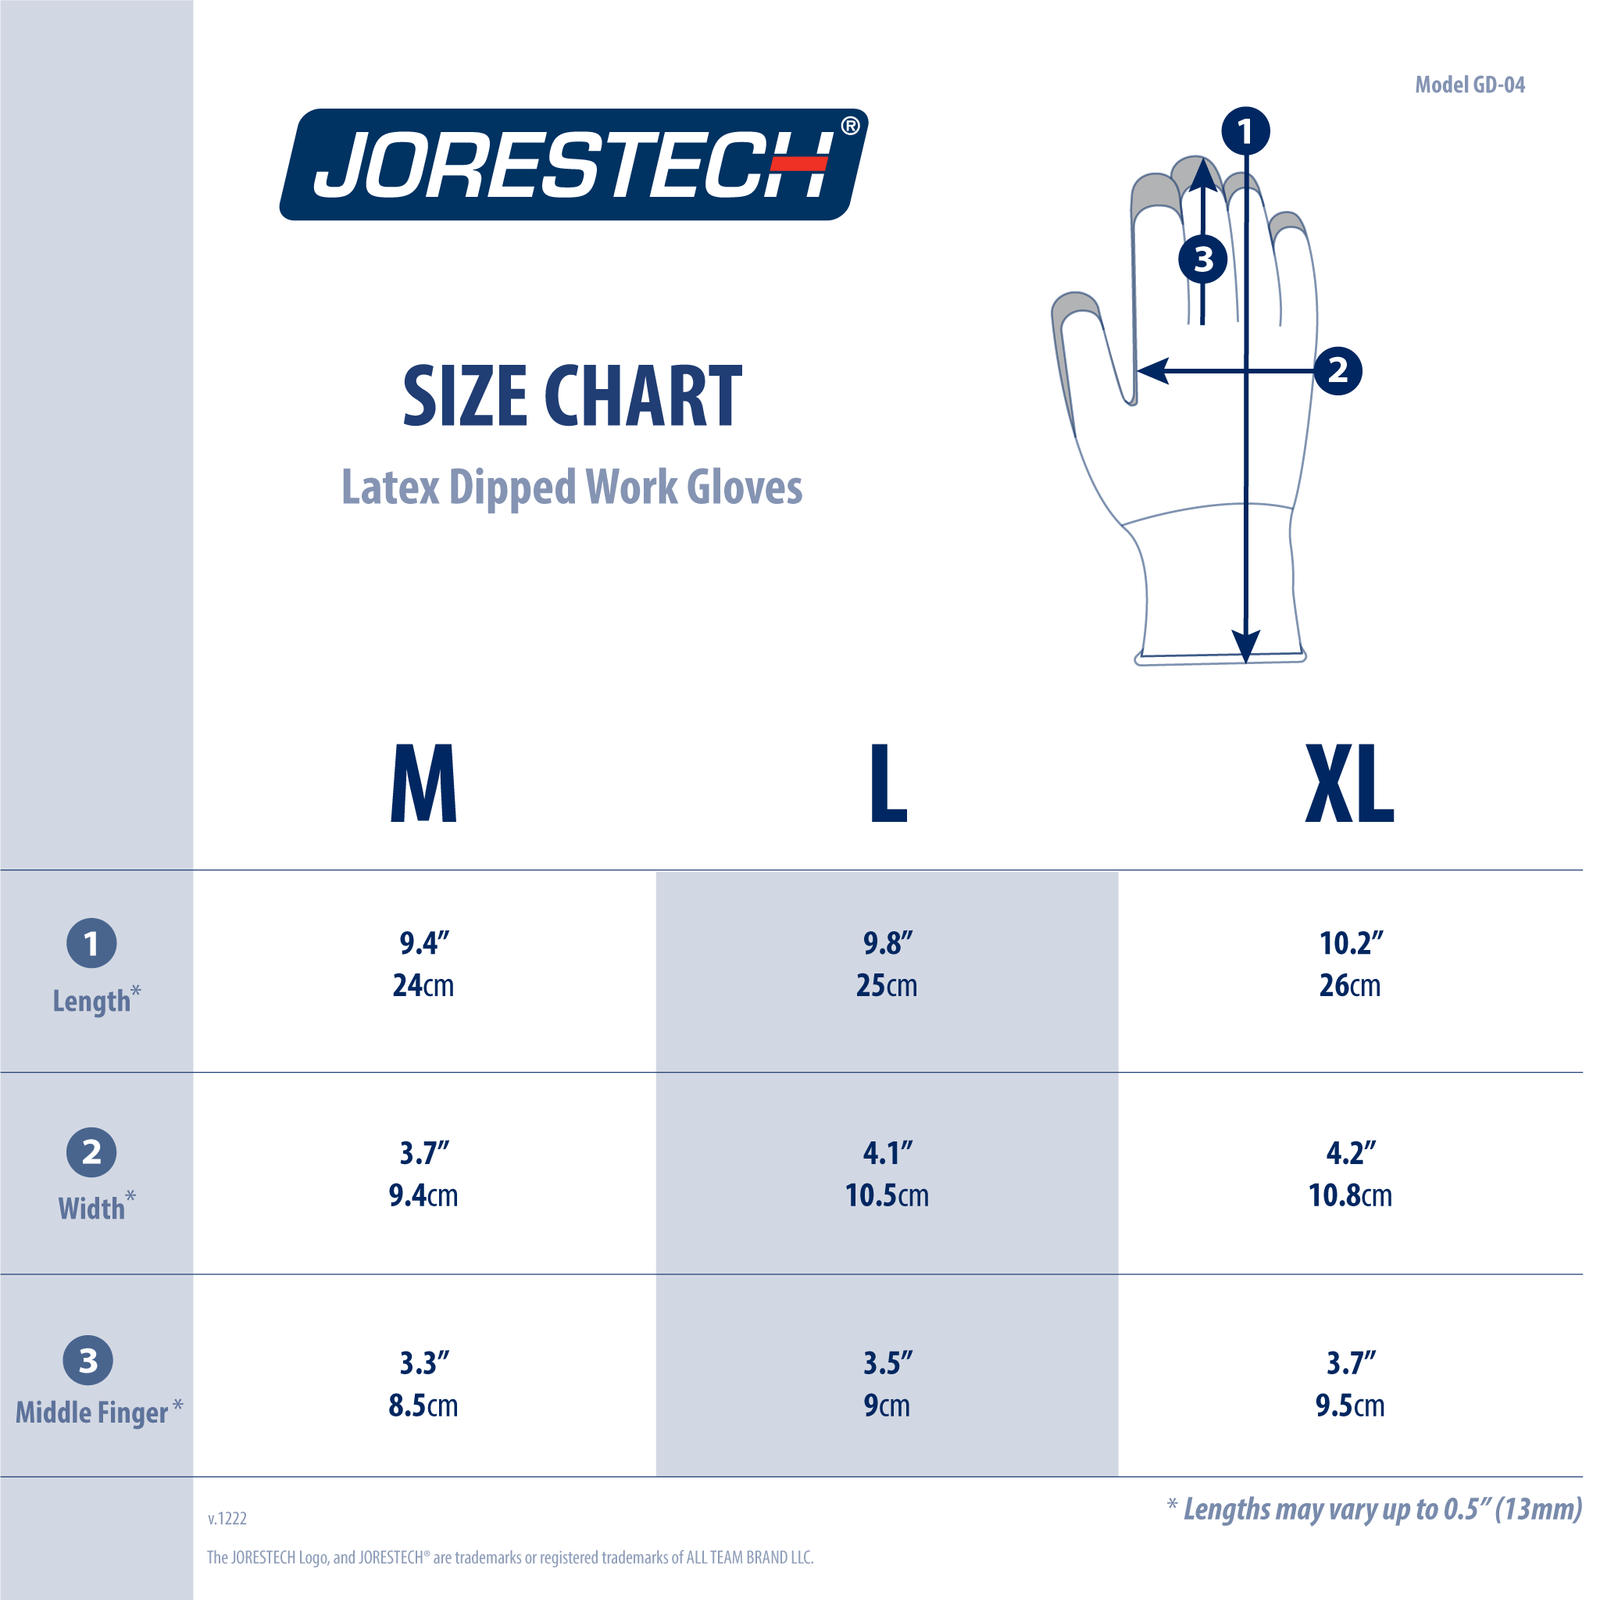 Size chart of JORESTECH latex coated work gloves